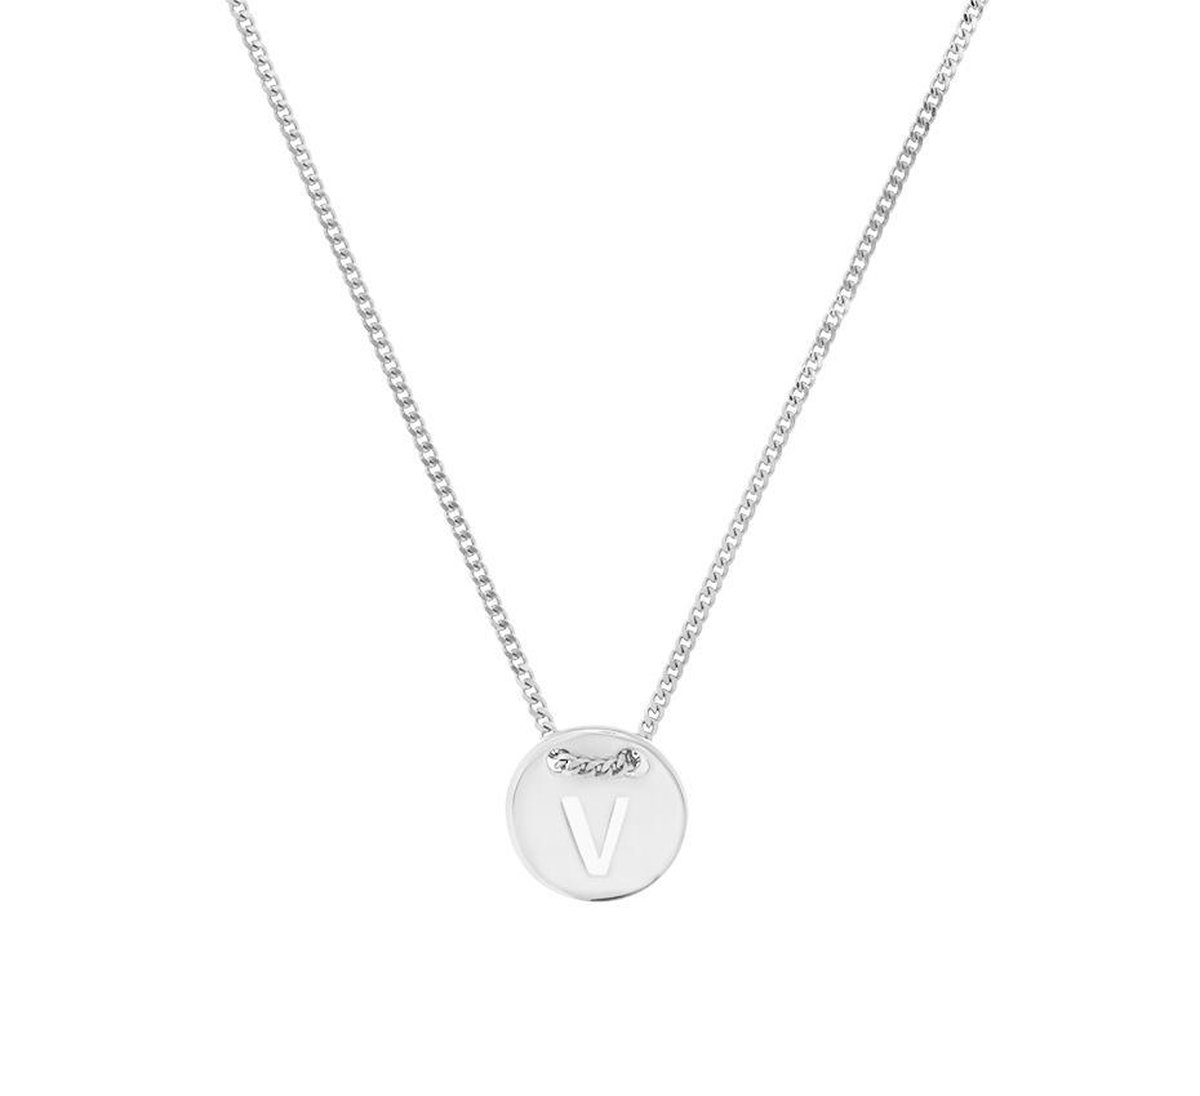 The Fashion Jewelry Collection Ketting Letter V 1,3 mm 41 + 4 cm - Zilver Gerhodineerd